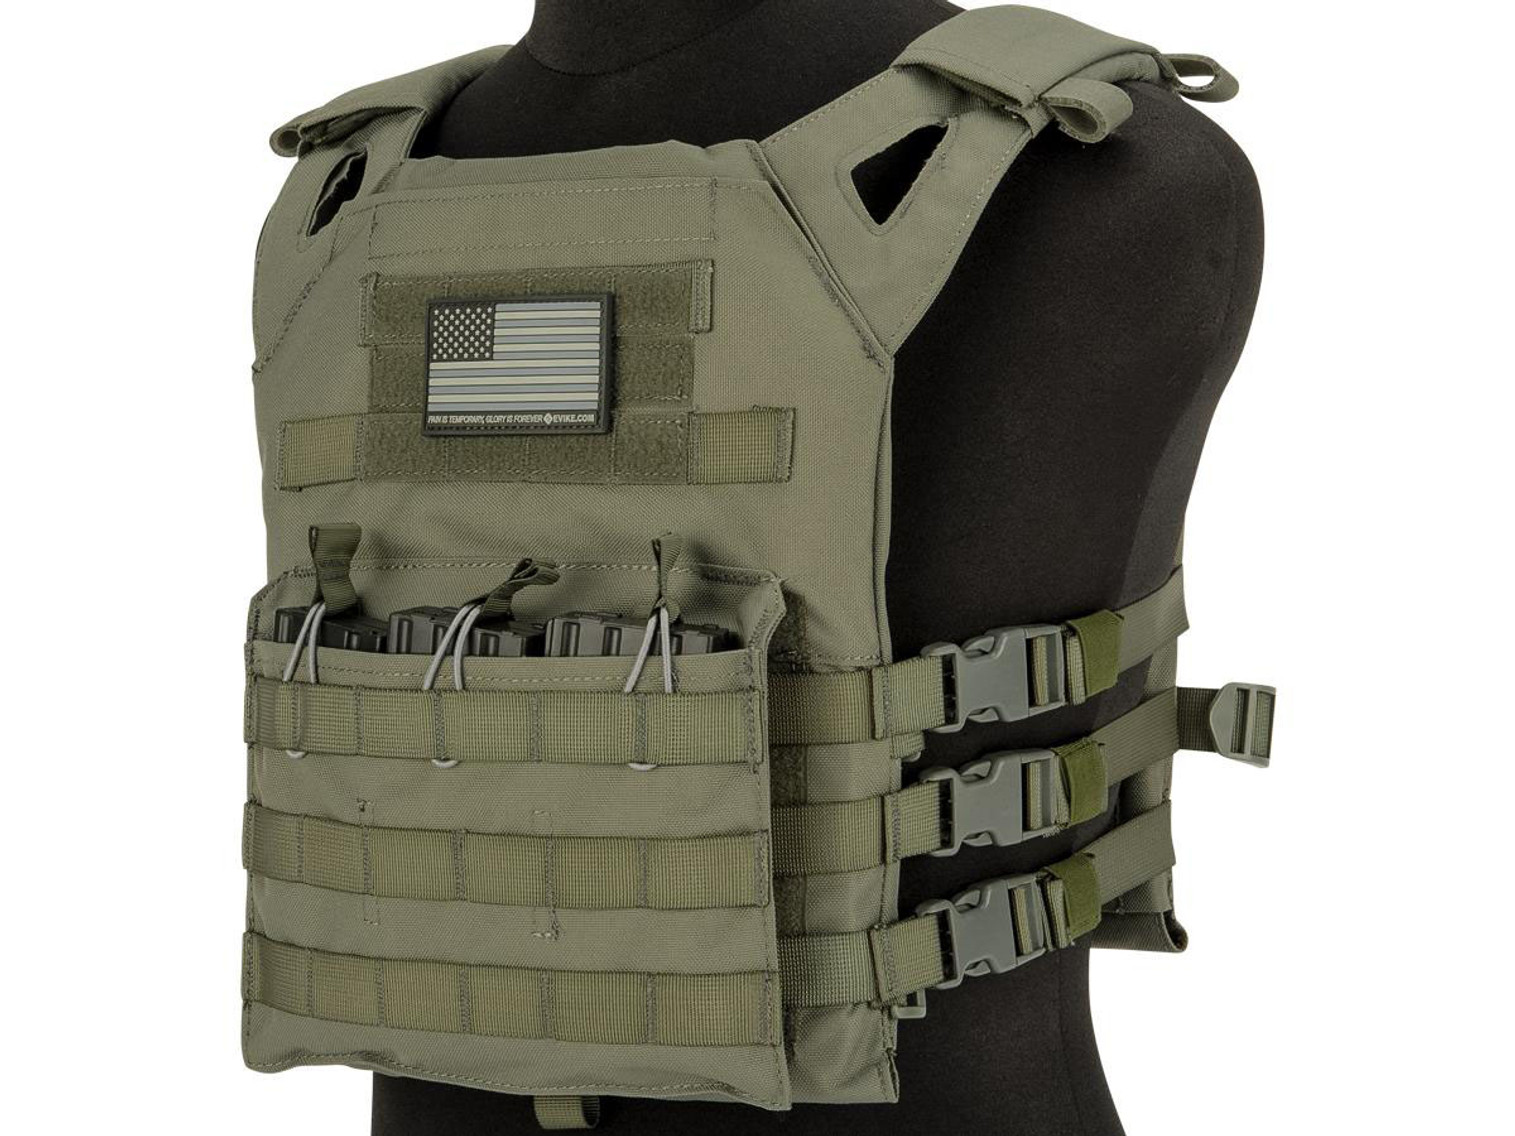 Matrix Level-1 Plate Carrier with Integrated Magazine Pouches (Color: Ranger Green)